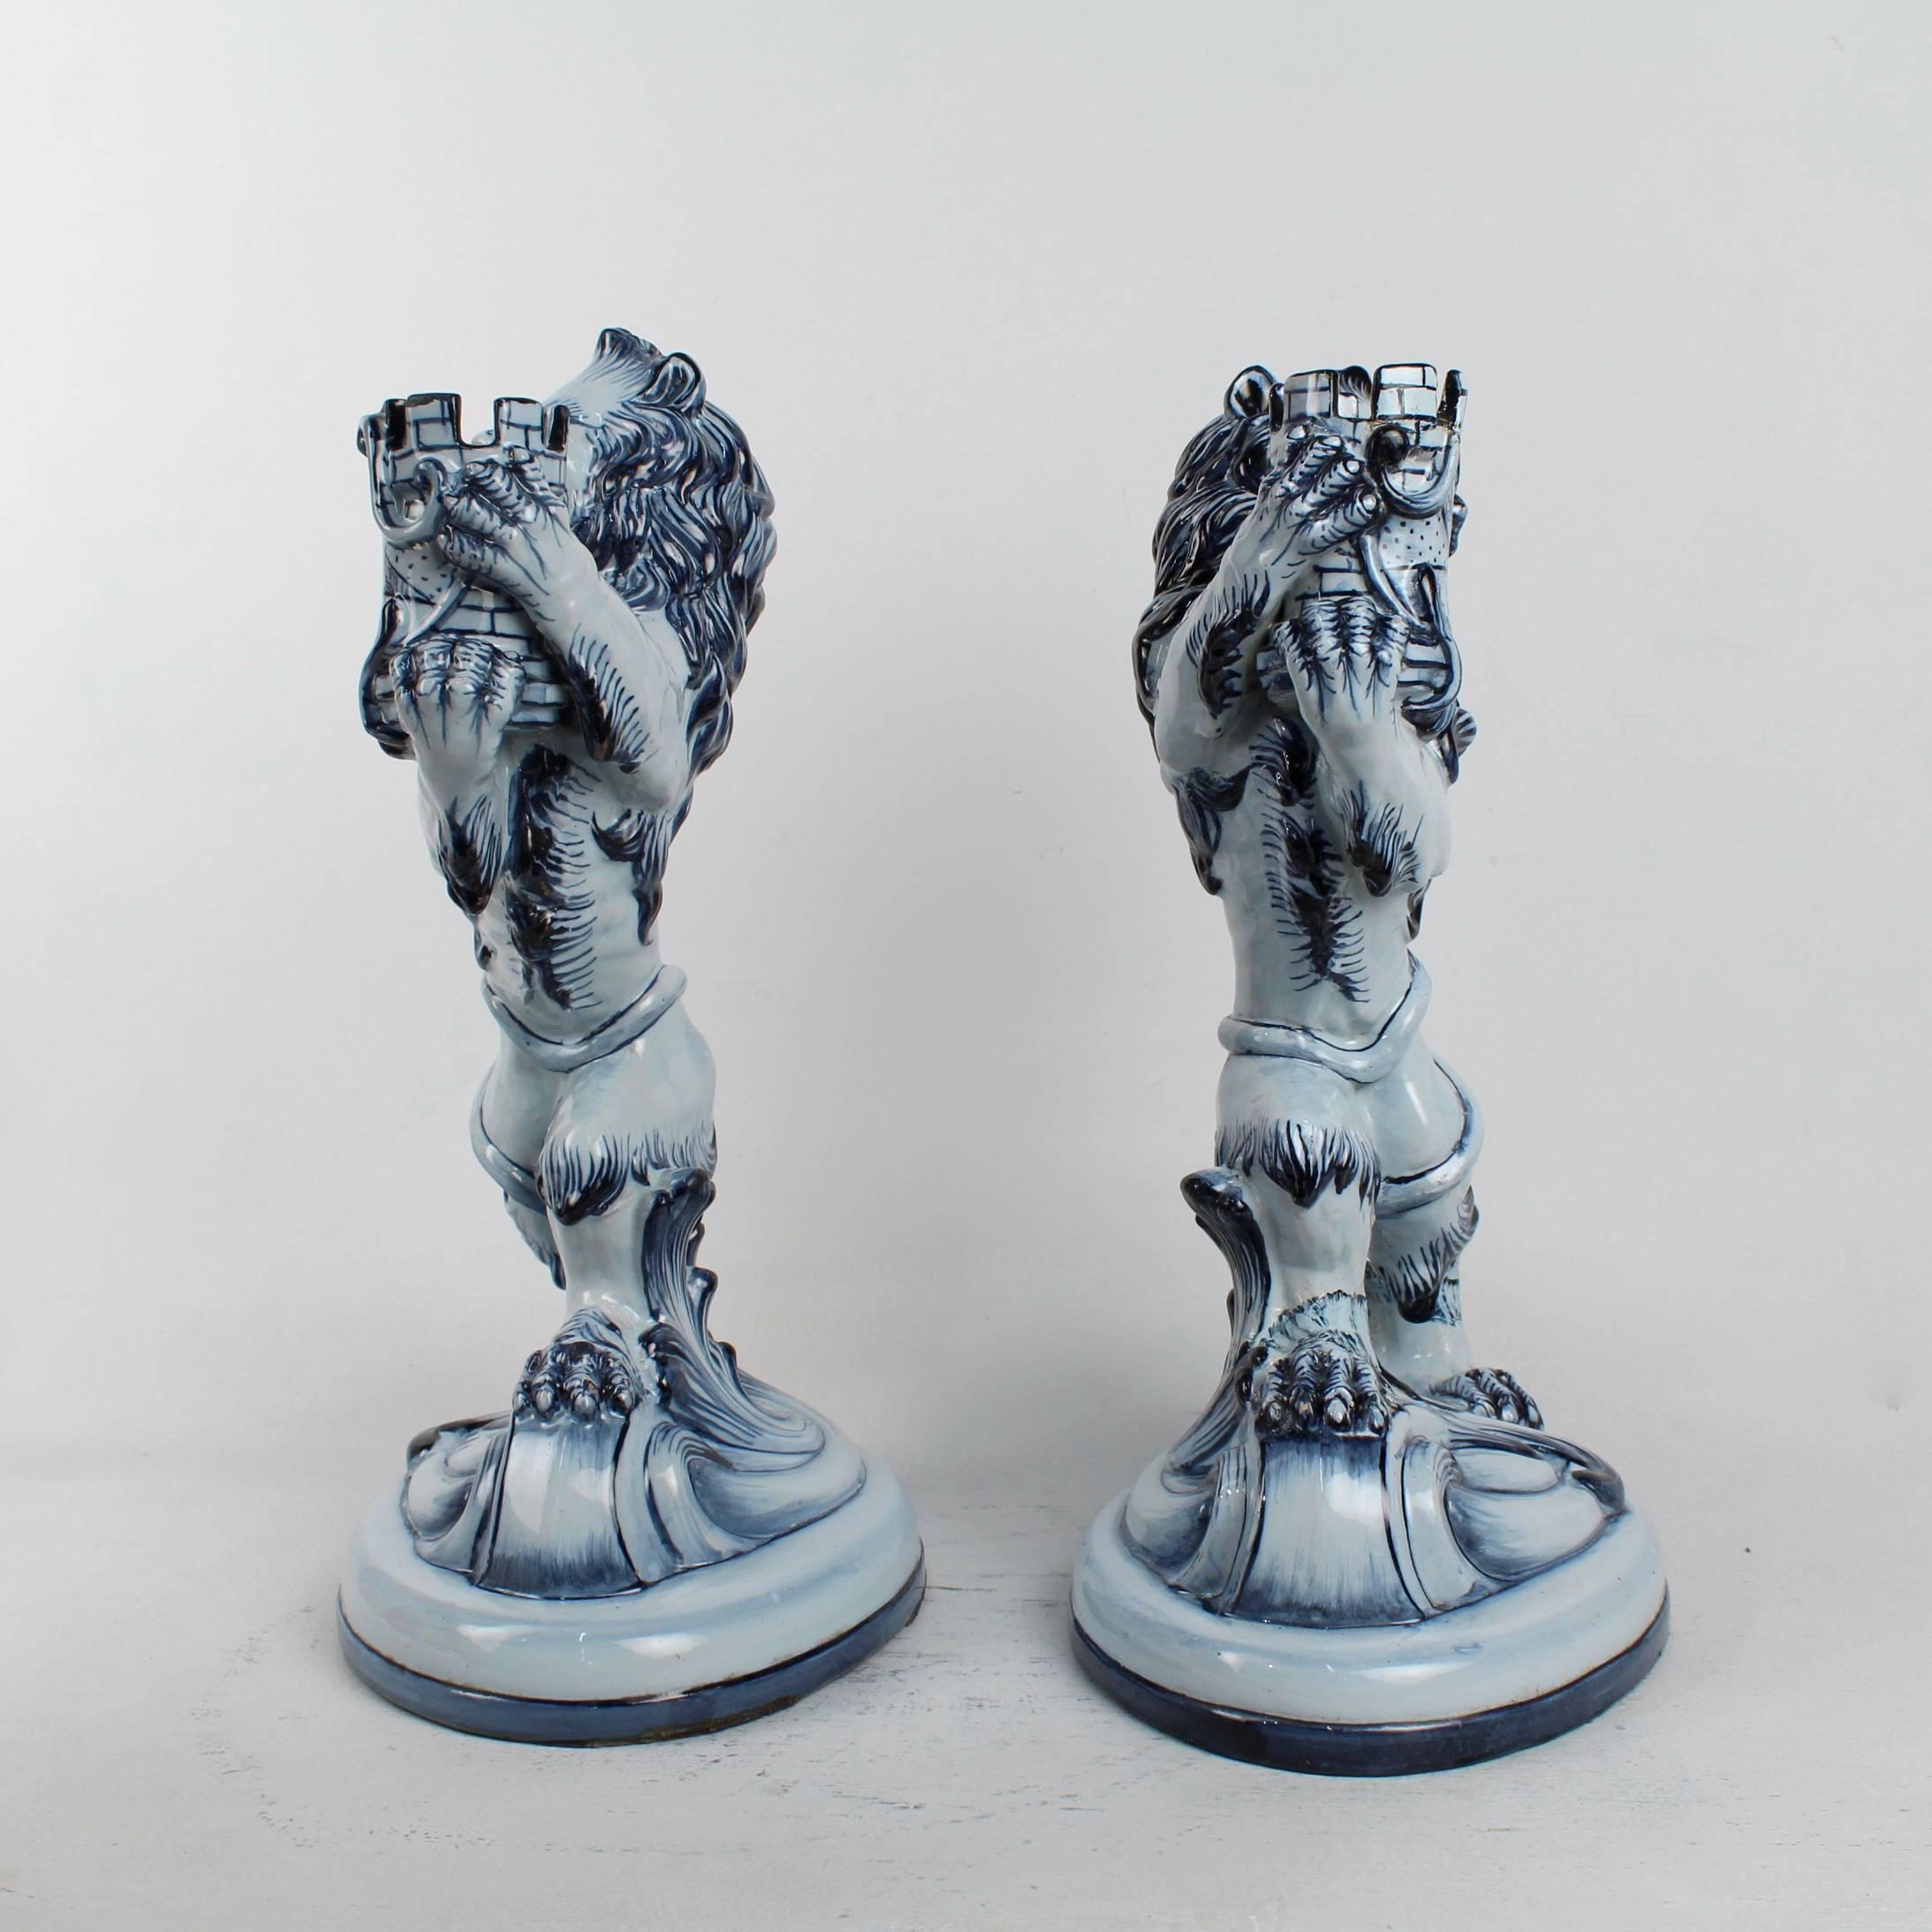 Glazed Pair of Large Antique Emile Galle Nancy French Faience or Majolica Mantel Lions